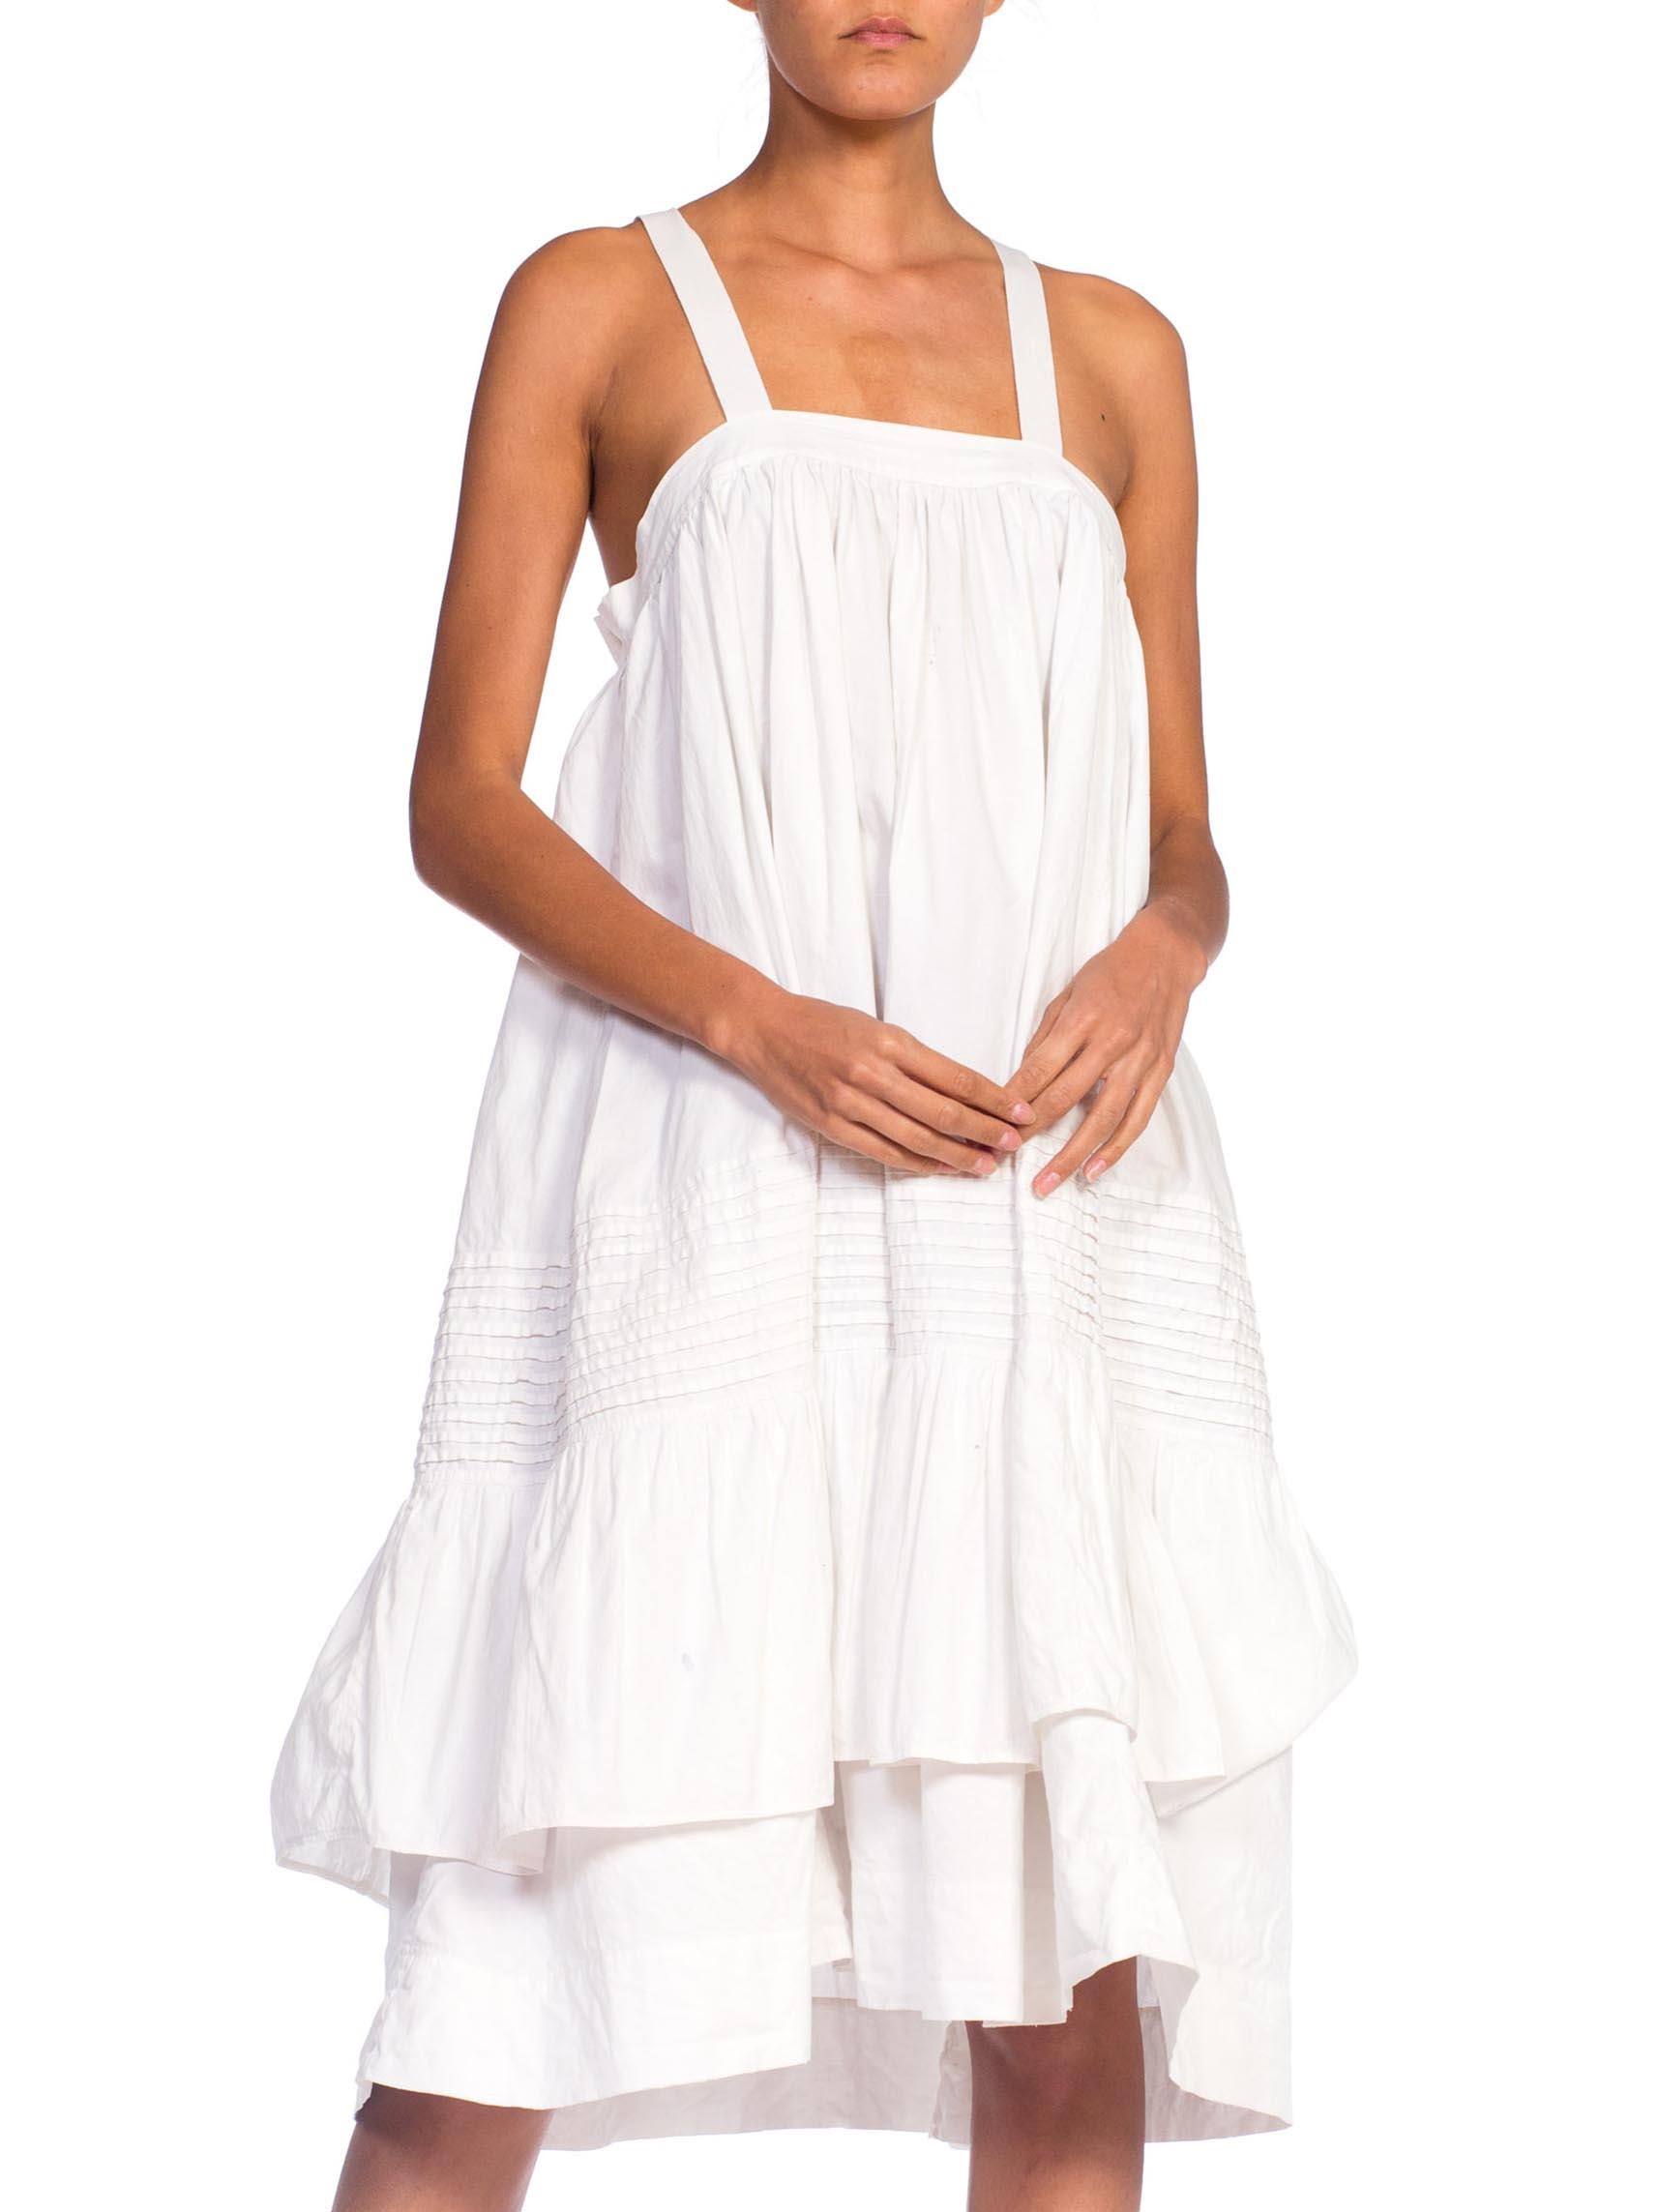 MORPHEW COLLECTION White Organic Cotton Tunic Dress Made From A Victorian Skirt
MORPHEW COLLECTION is made entirely by hand in our NYC Ateliér of rare antique materials sourced from around the globe. Our sustainable vintage materials represent over